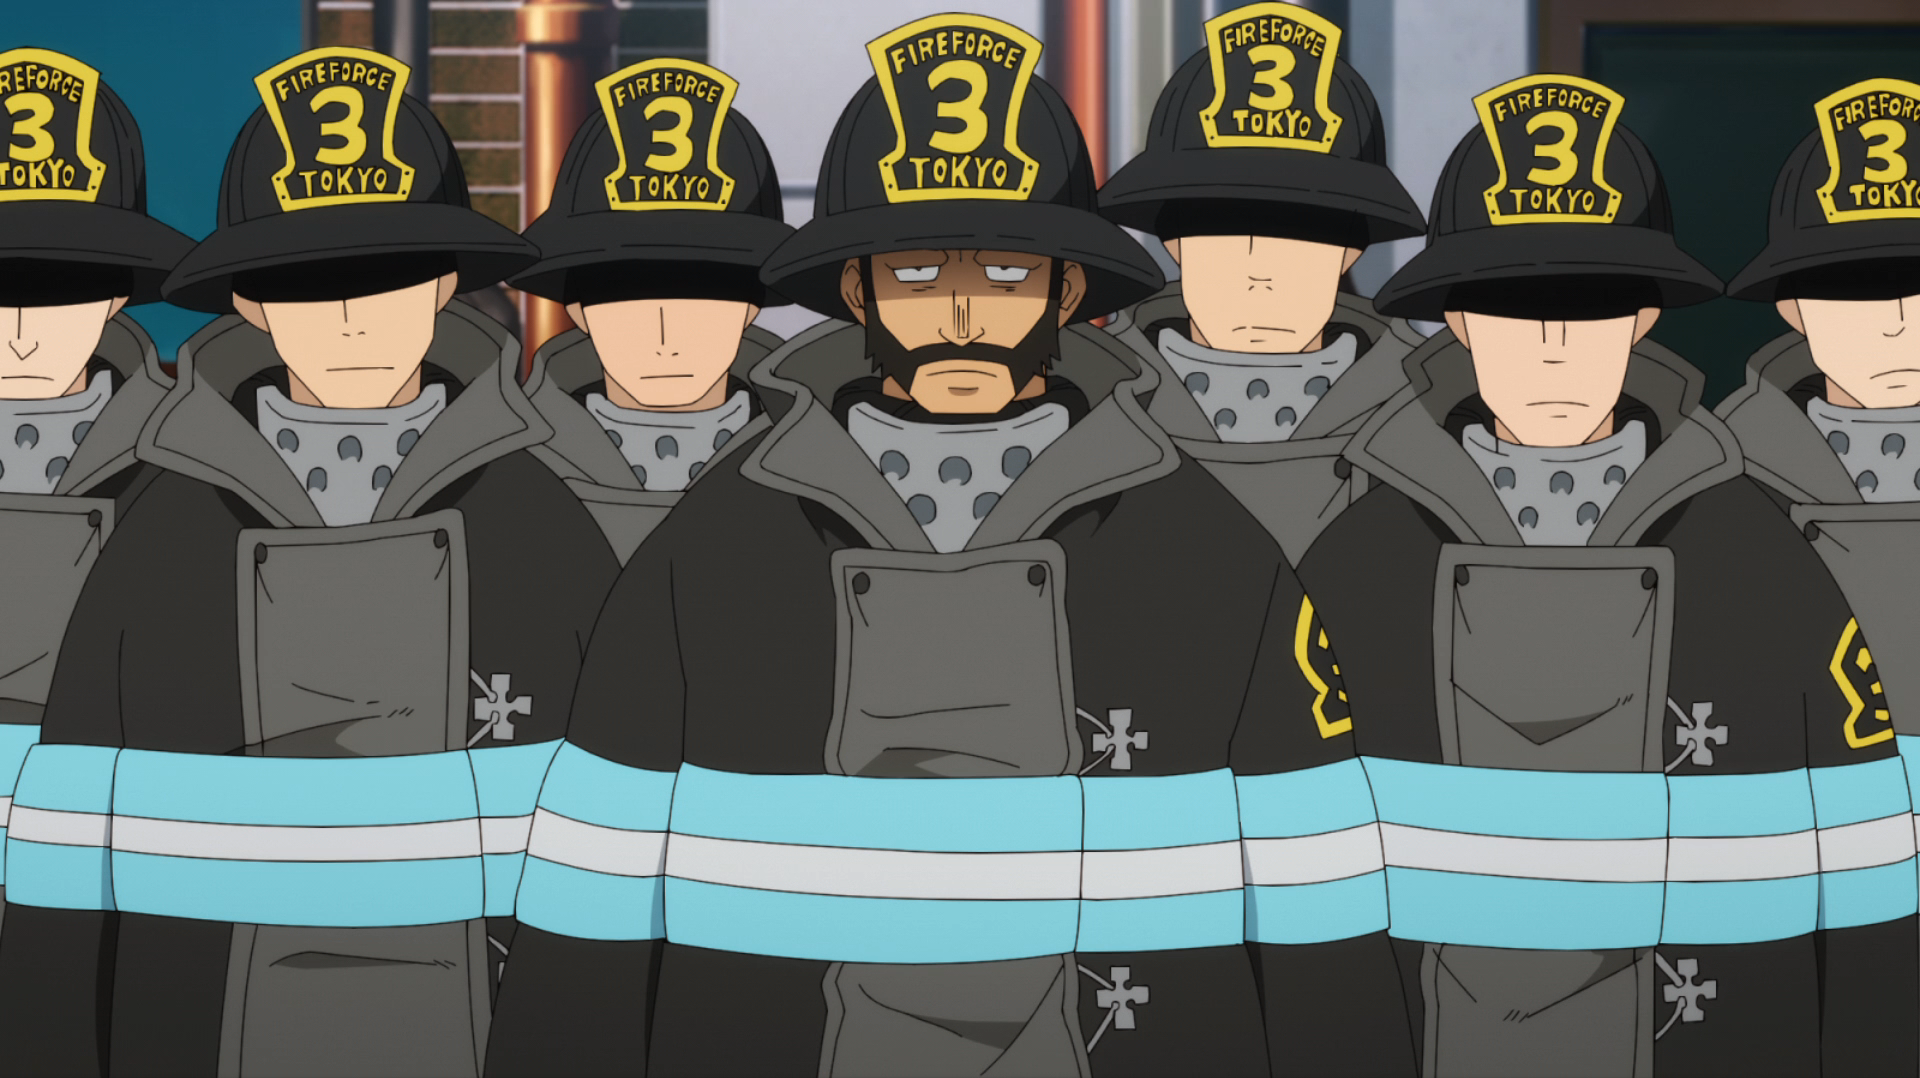 Fire Force 3